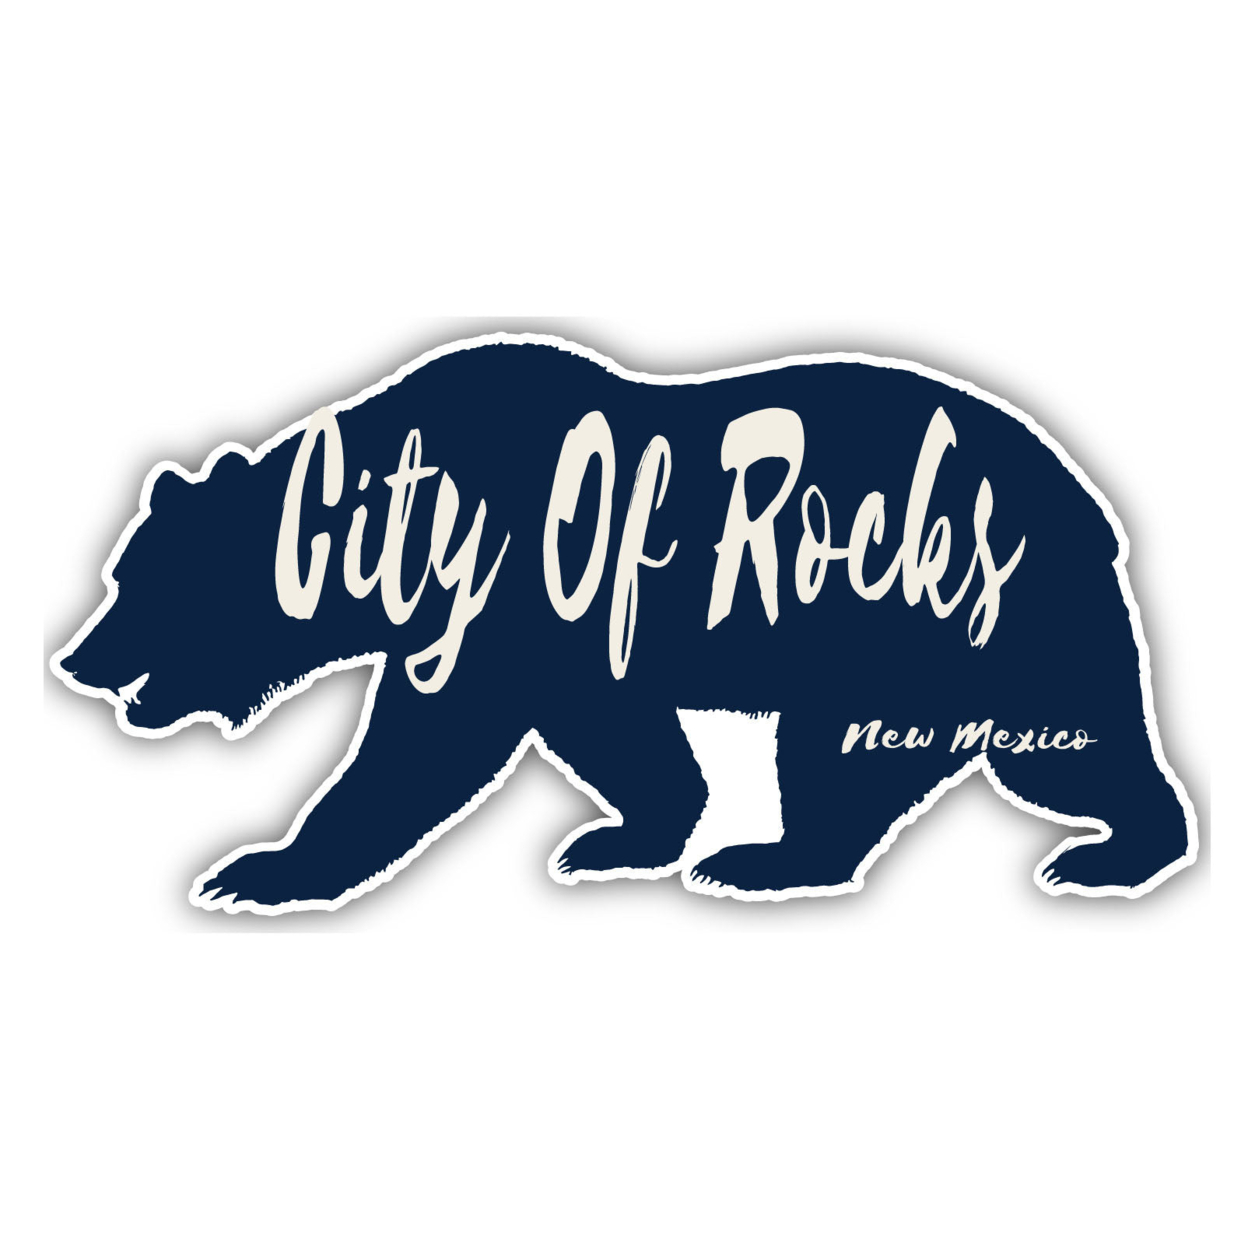 City Of Rocks New Mexico Souvenir Decorative Stickers (Choose Theme And Size) - 4-Pack, 2-Inch, Bear